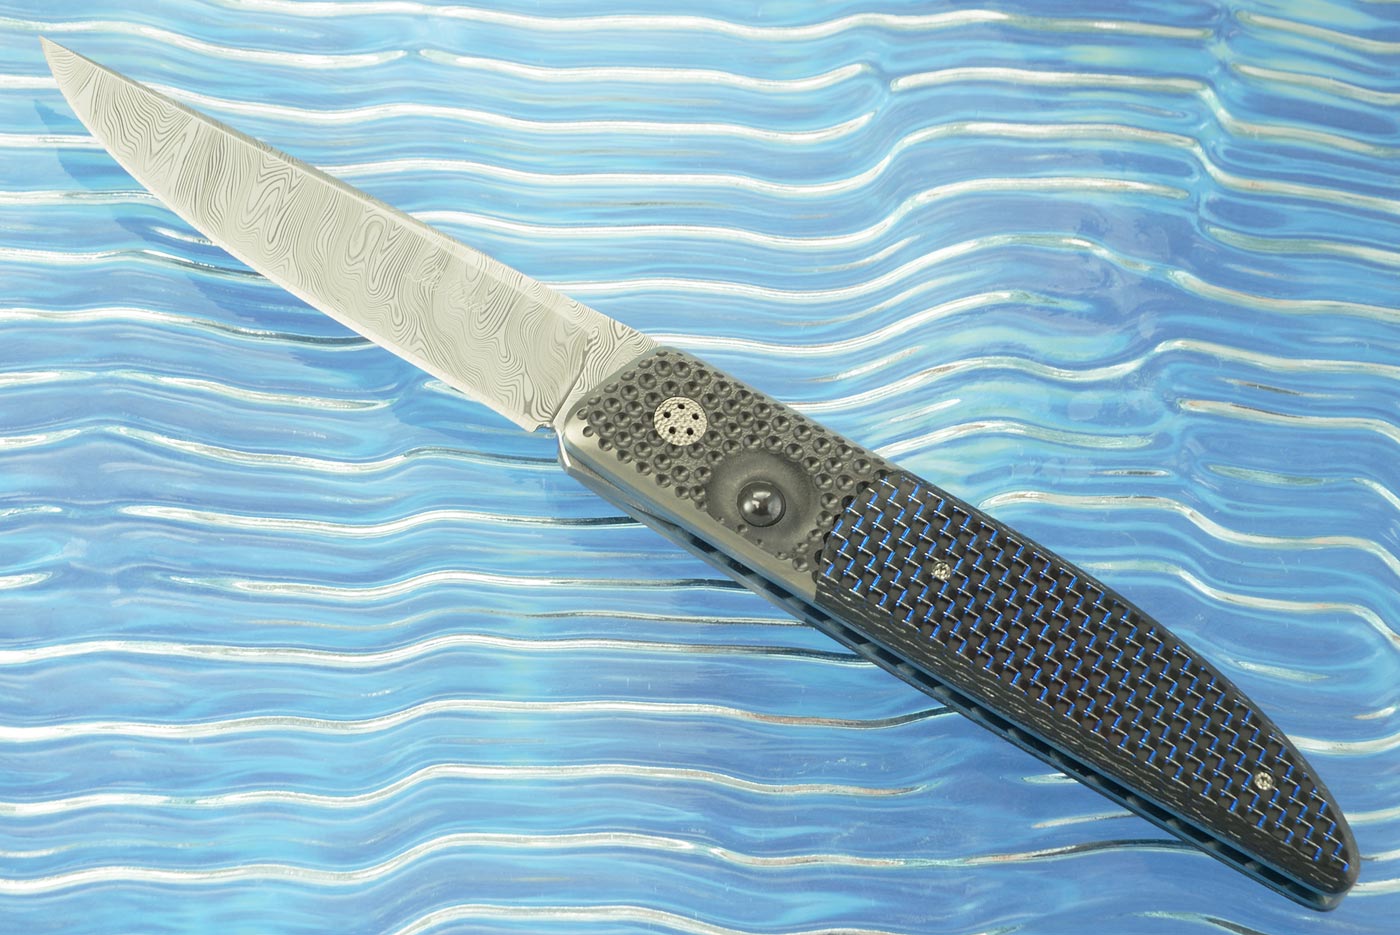 Large Ball Release Front Flipper with Damasteel and Blue/Silver Carbon Fiber